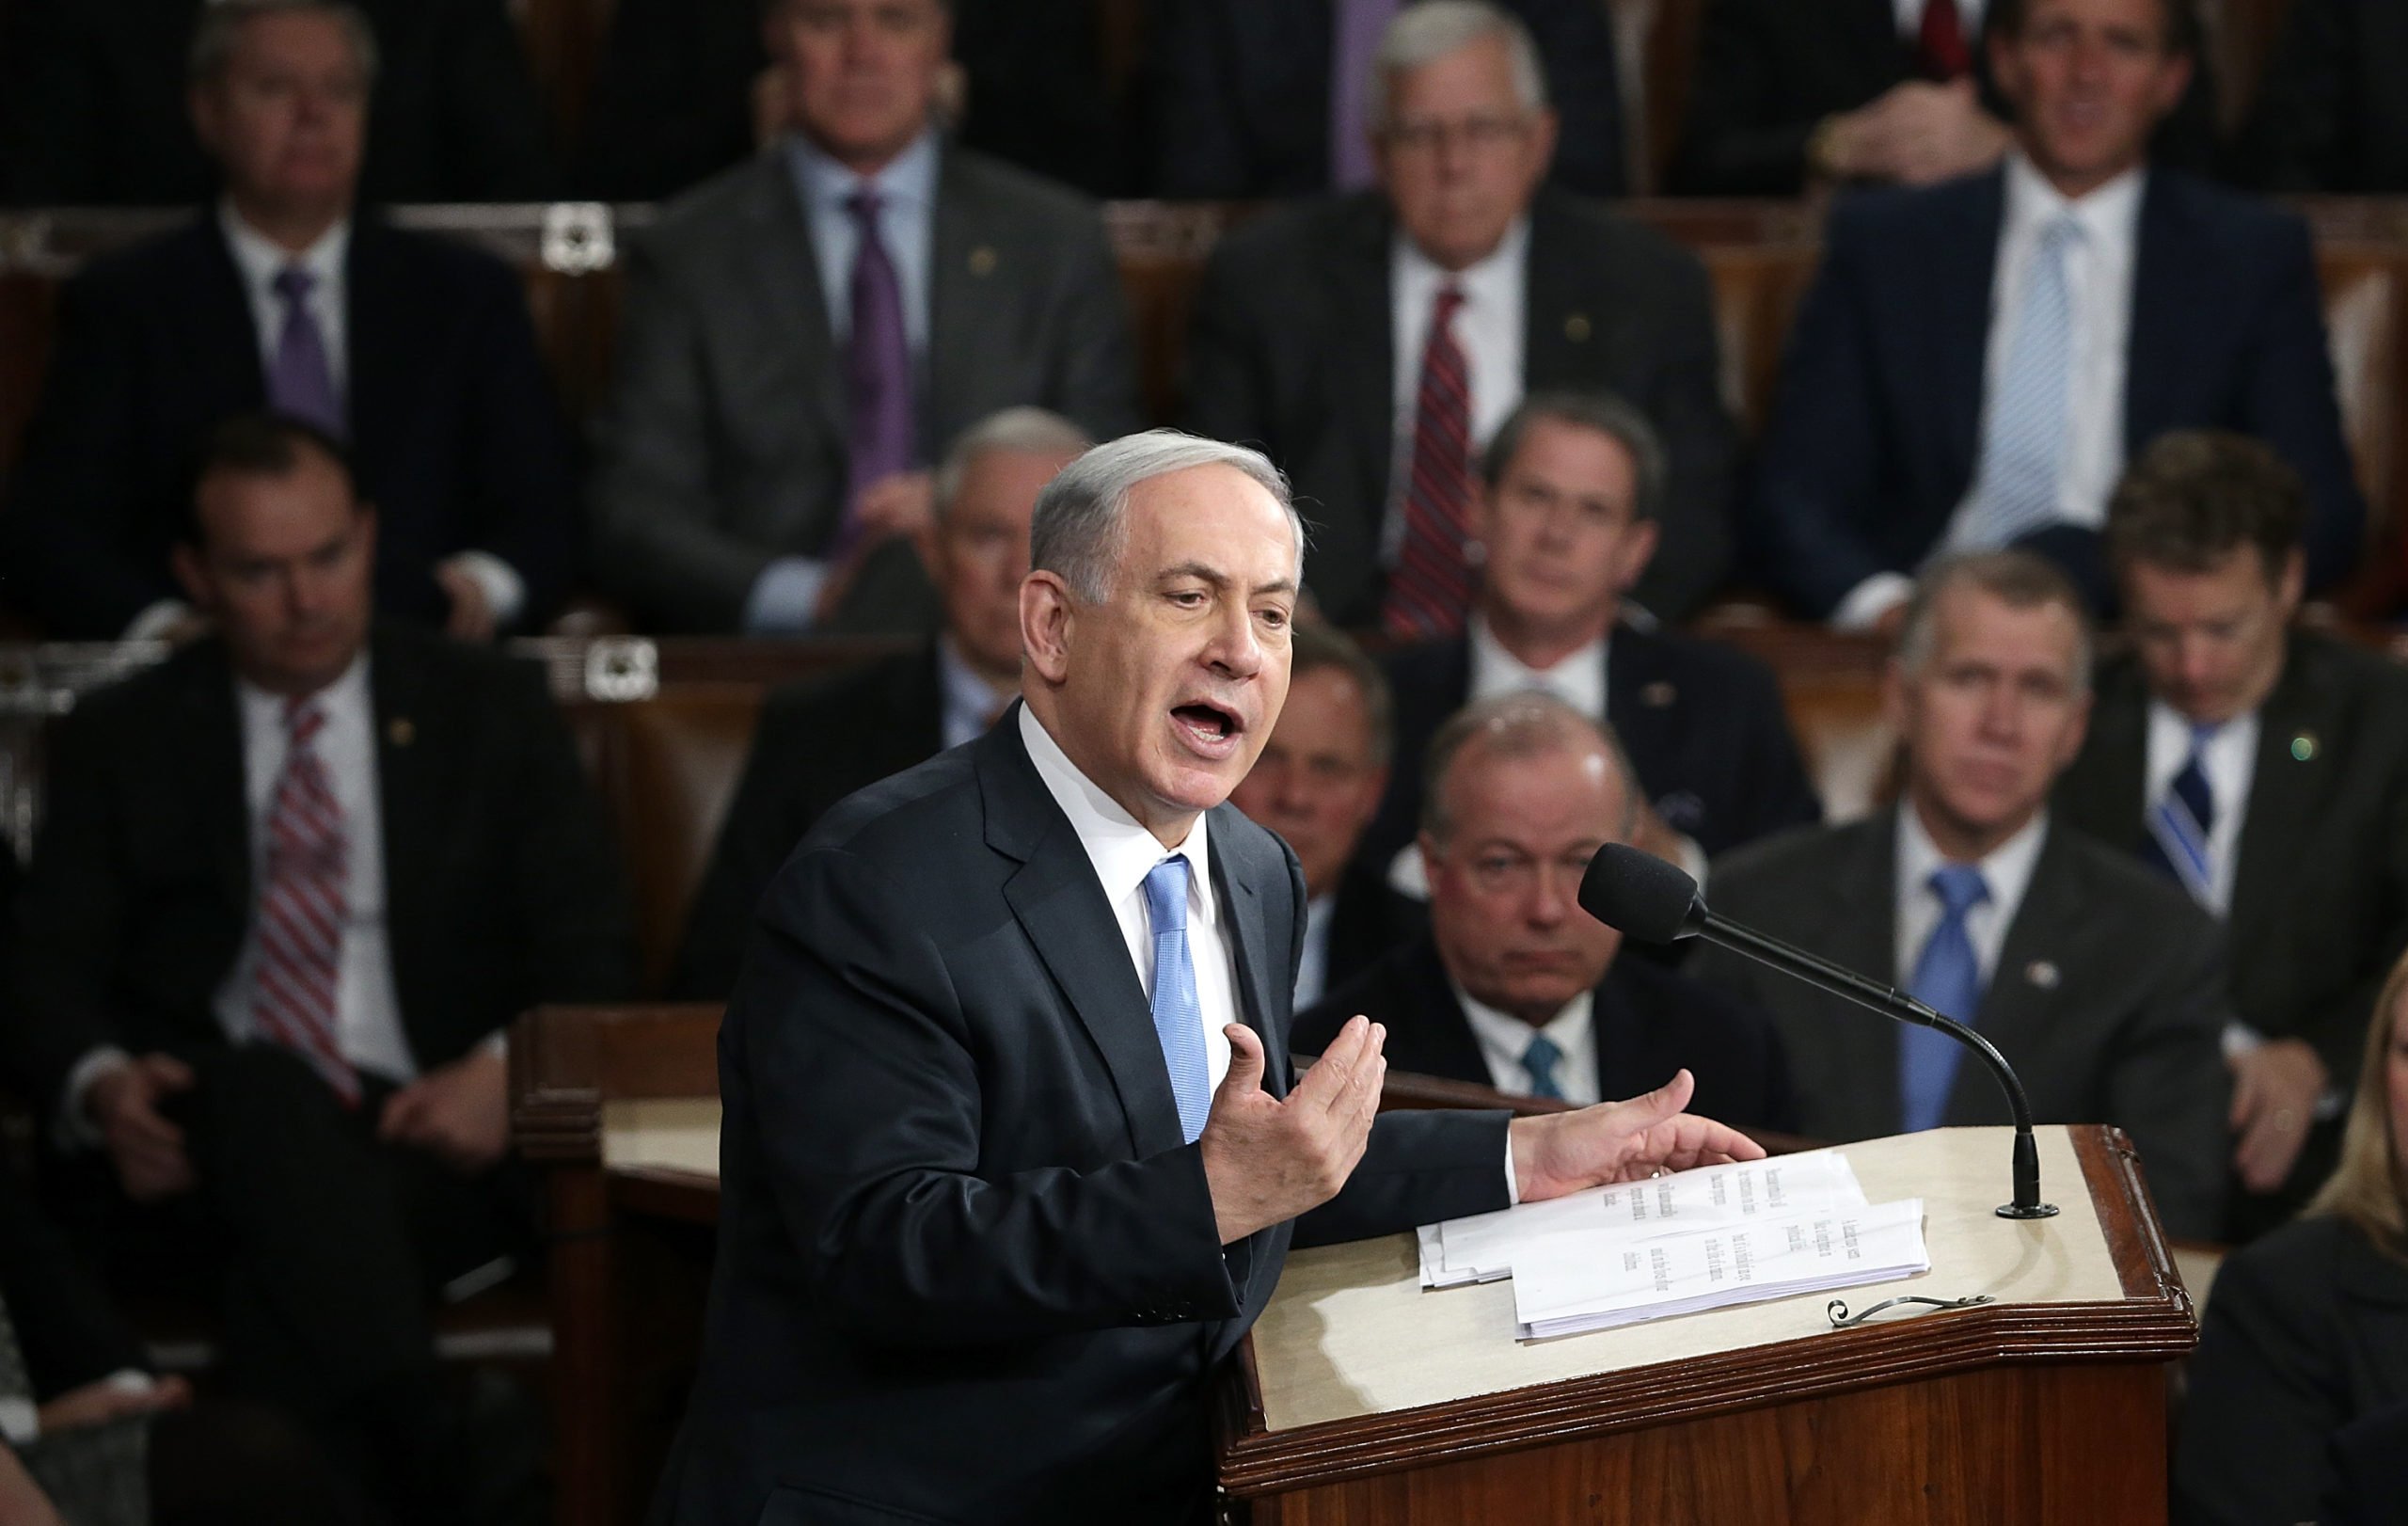 WASHINGTON, DC - MARCH 03: Israeli Prime Minister Benjamin Netanyahu addresses a joint meeting of the United States Congress in the House chamber at the U.S. Capitol March 3, 2015 in Washington, DC. During his speech, Netanyah said, "Today the Jewish people face yet another attempt by another Persian potentate to destroy us." (Photo by Win McNamee/Getty Images)